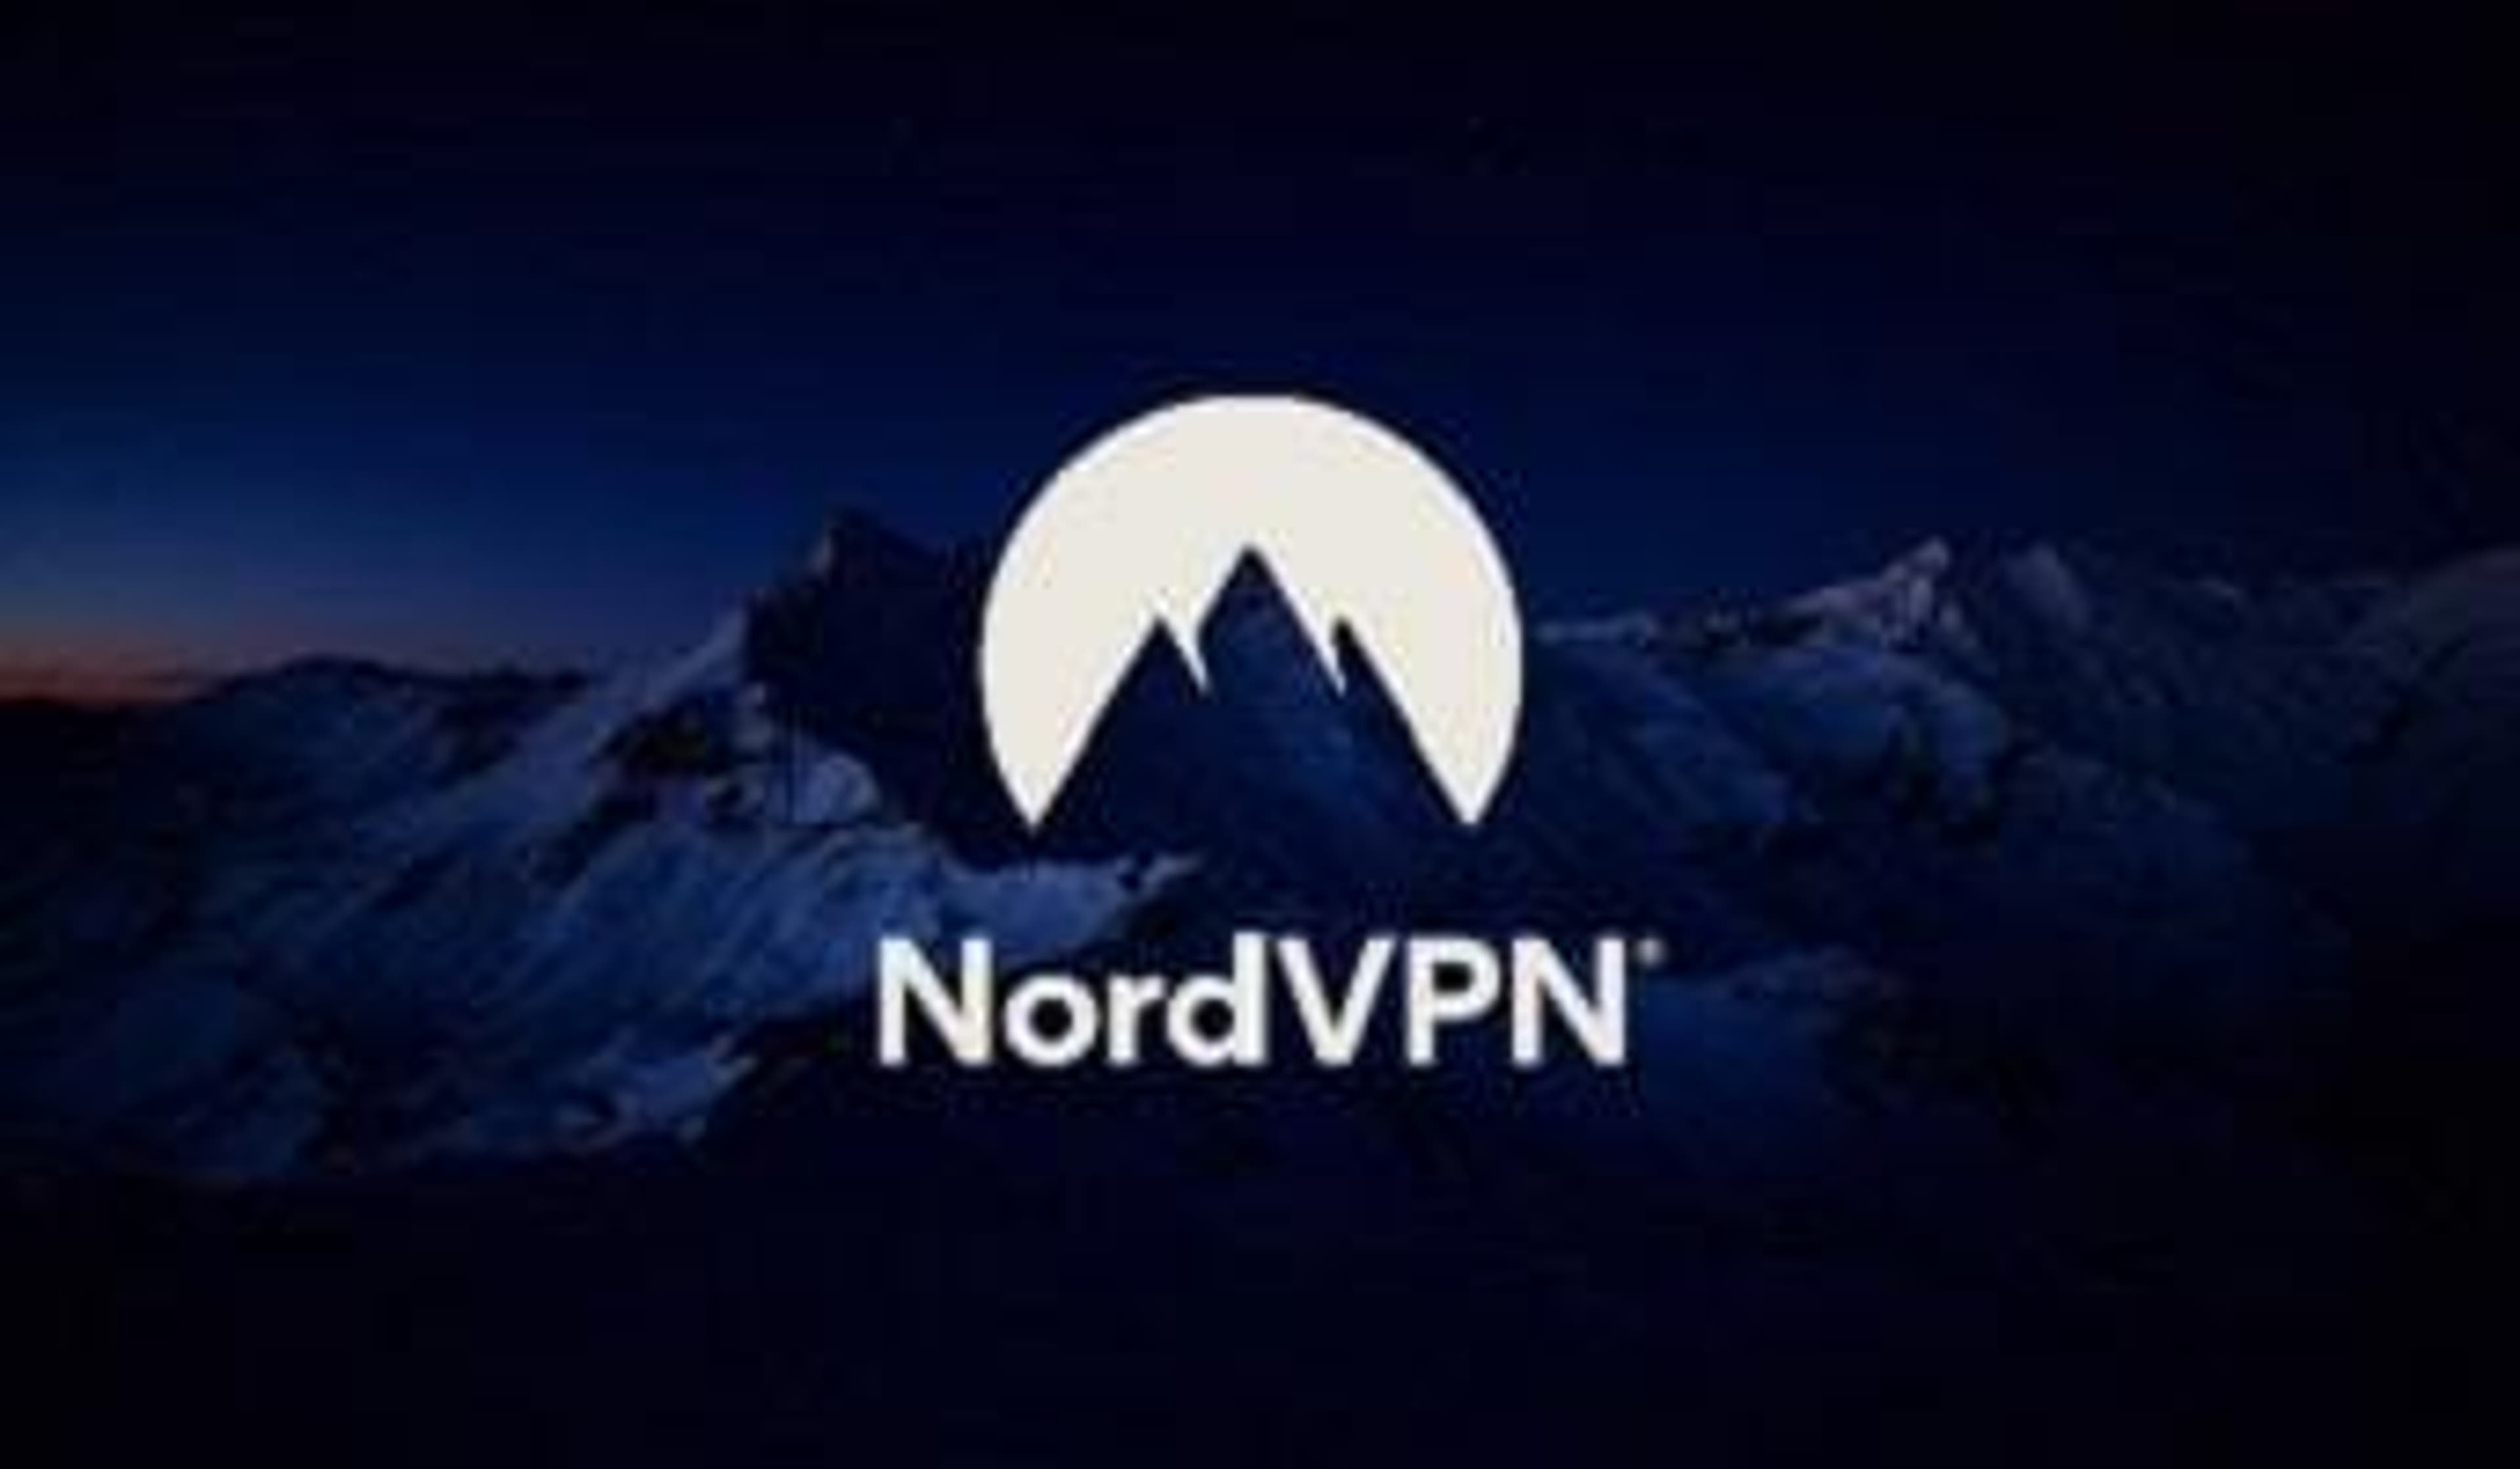  The NordVPN logo set against a backdrop of a mountain range at night 